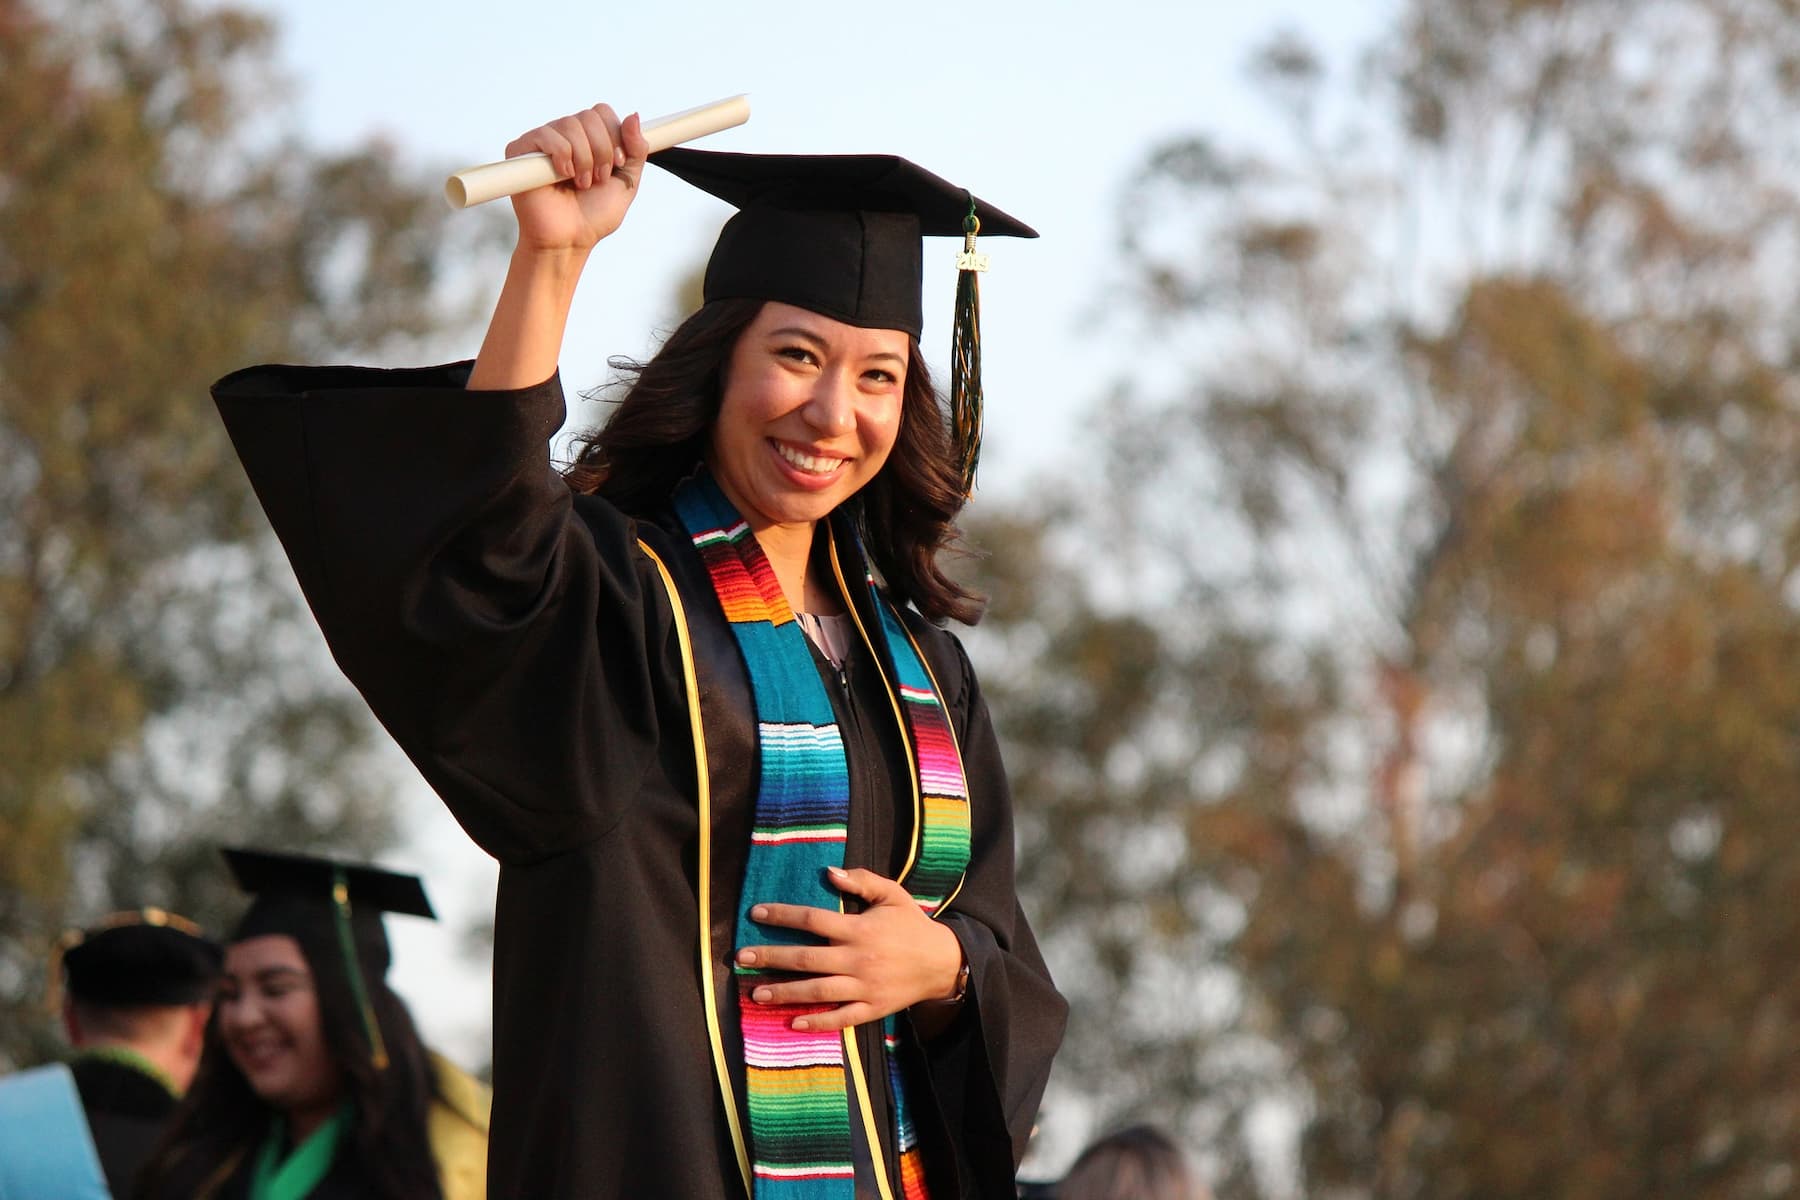 Woman raising her hand to show off her diploma while wearing graduation robes and cap